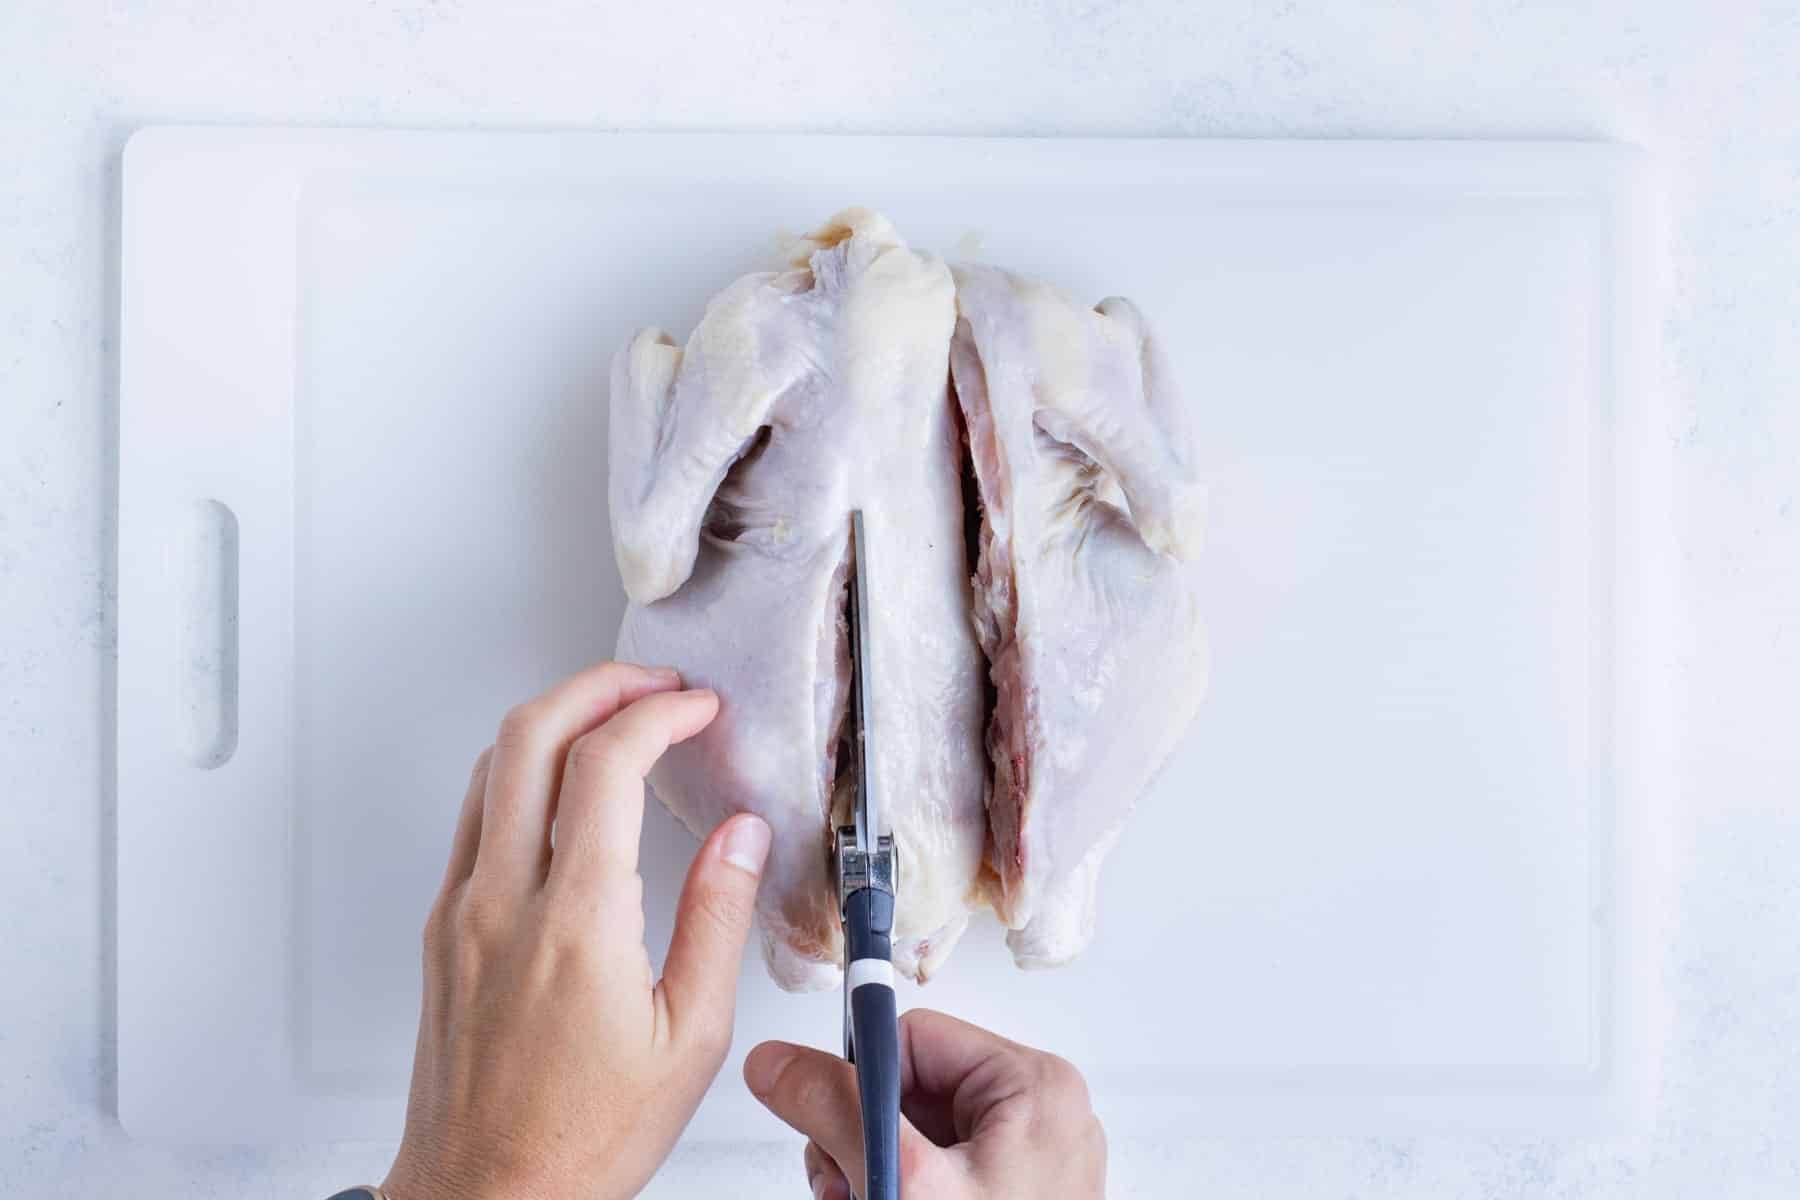 Kitchen shears cut both sides of the spine in a chicken.